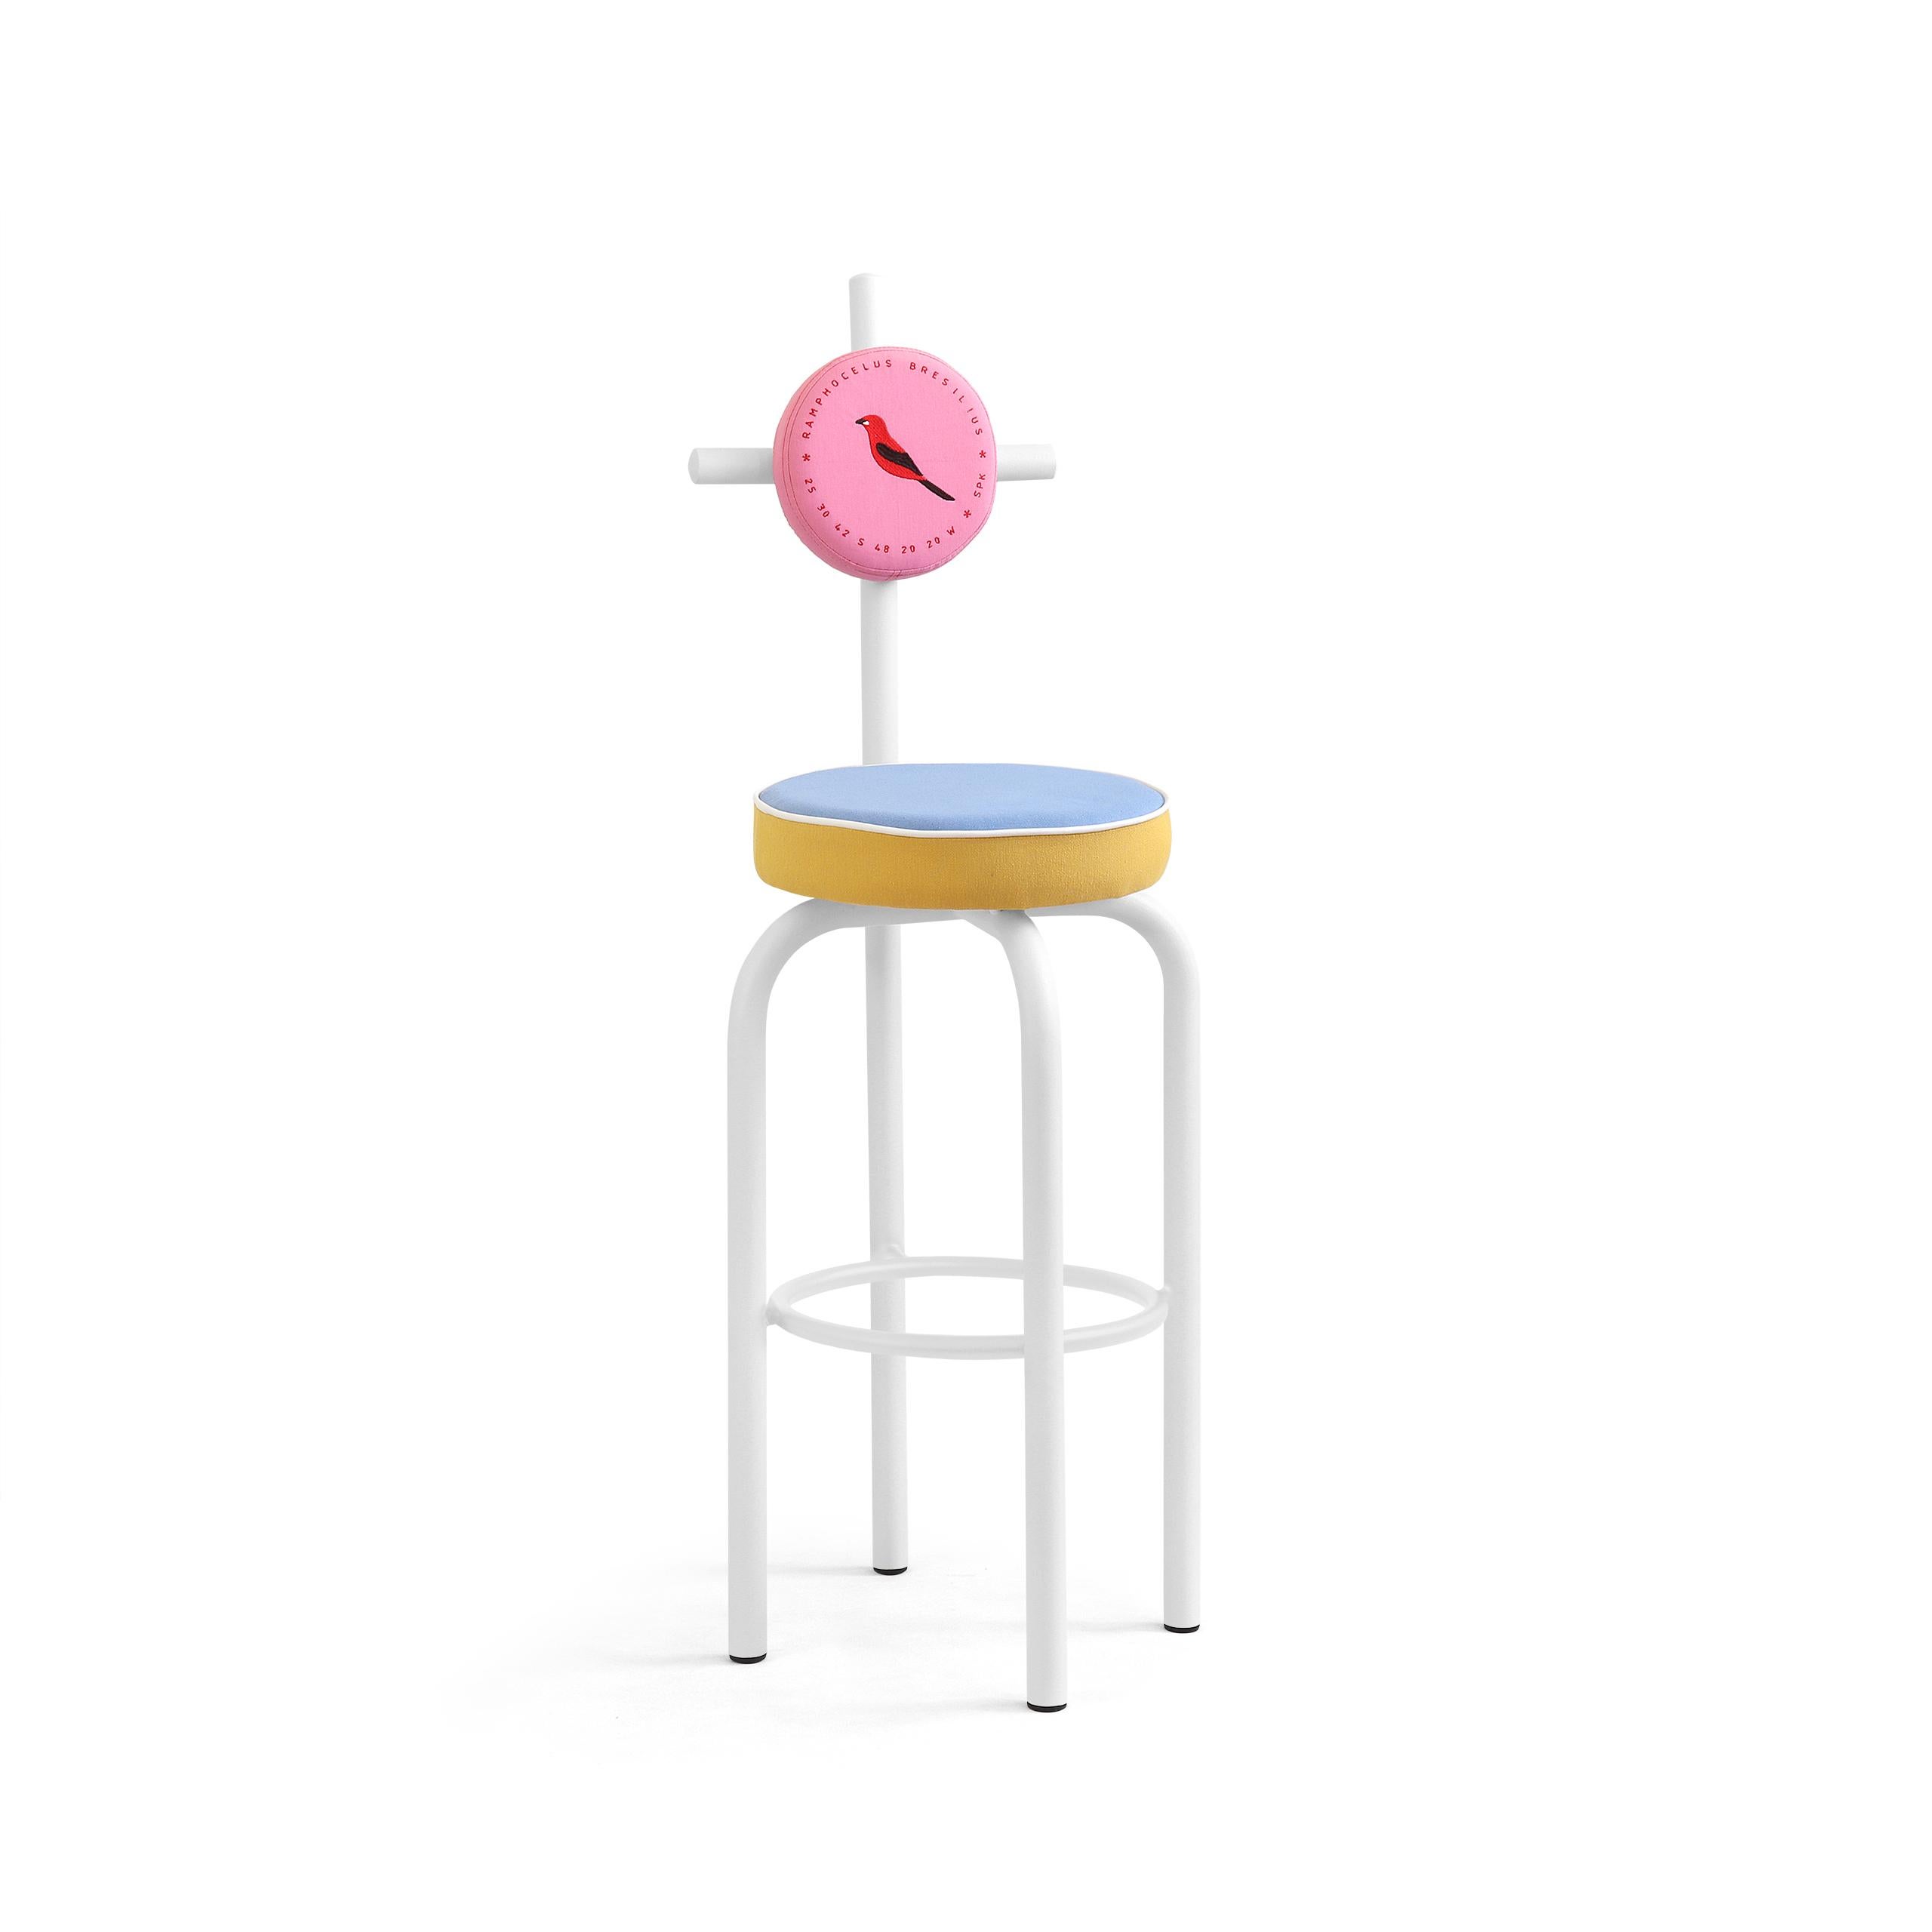 PK19 bar stool is handcrafted in tubular carbon steel and is finished in white micro-textured electrostatic paint.
Circular upholstery is covered with 100% cotton fabric.
The finishing edge of the seat is made of white nautical leatherette.

The